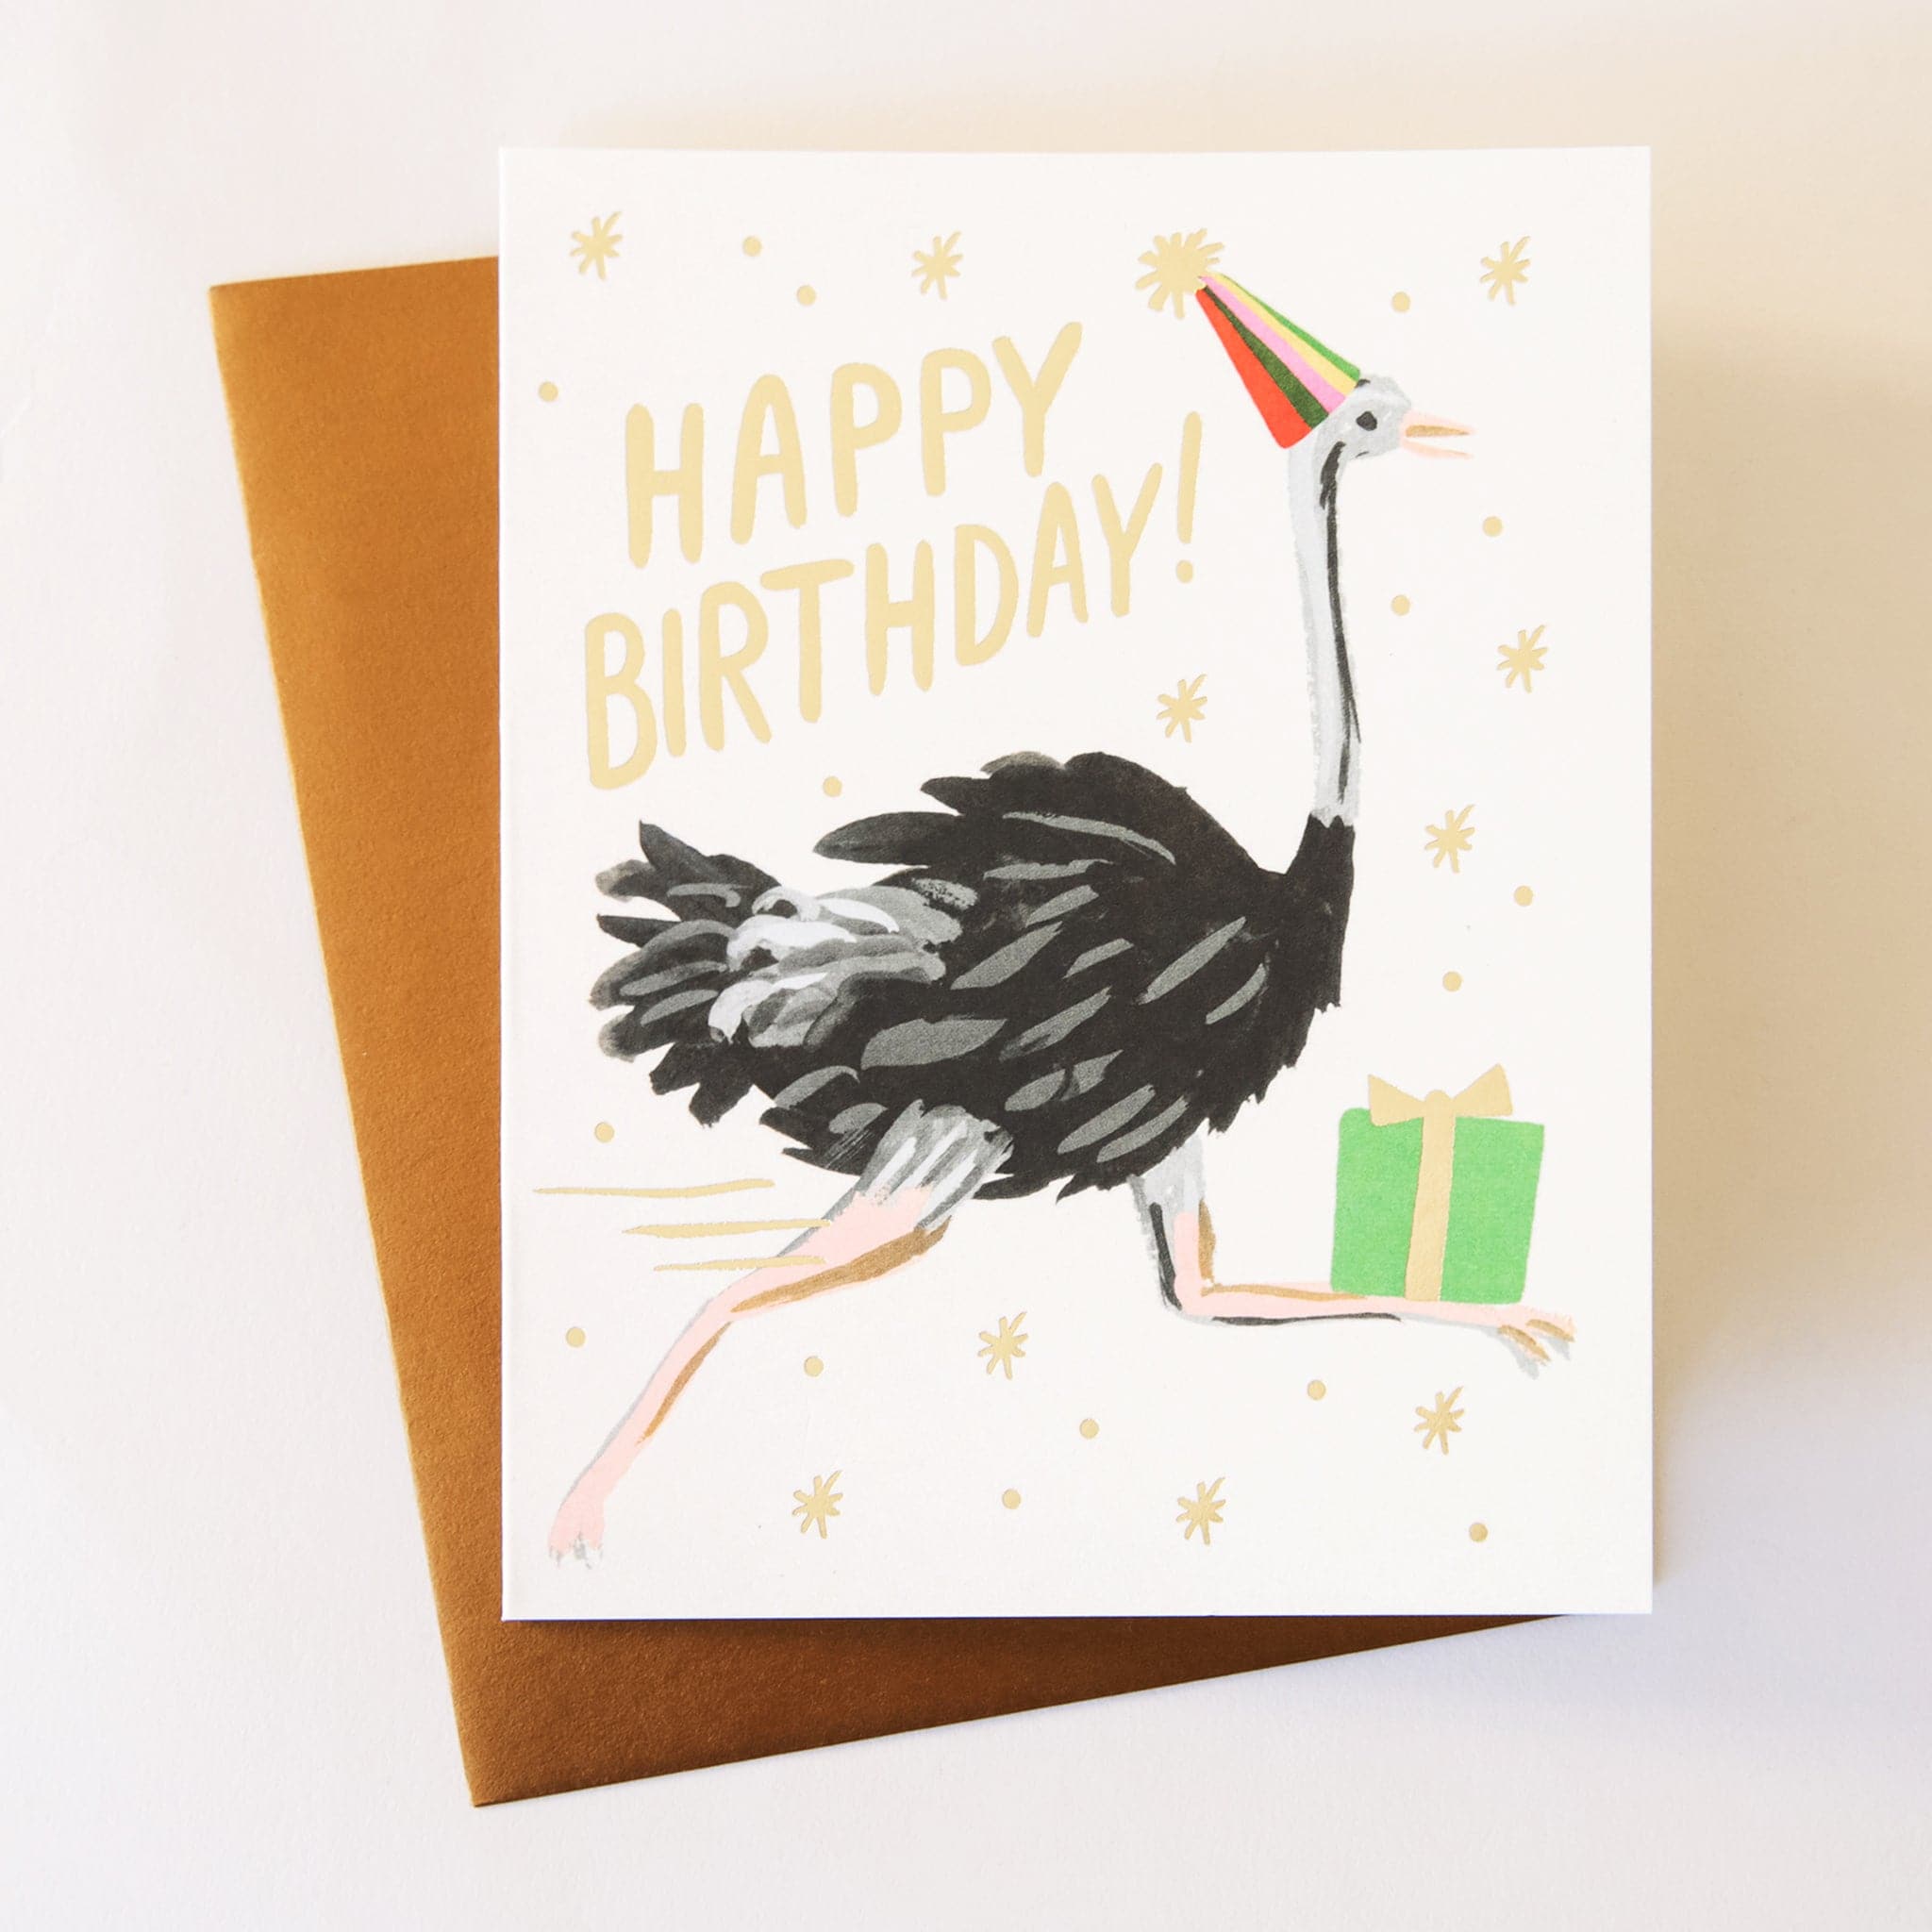 This adorable card has an ostrich running with a birthday present an a party hat. There is gold foil stars and lettering saying, &quot;Happy Birthday!&quot;